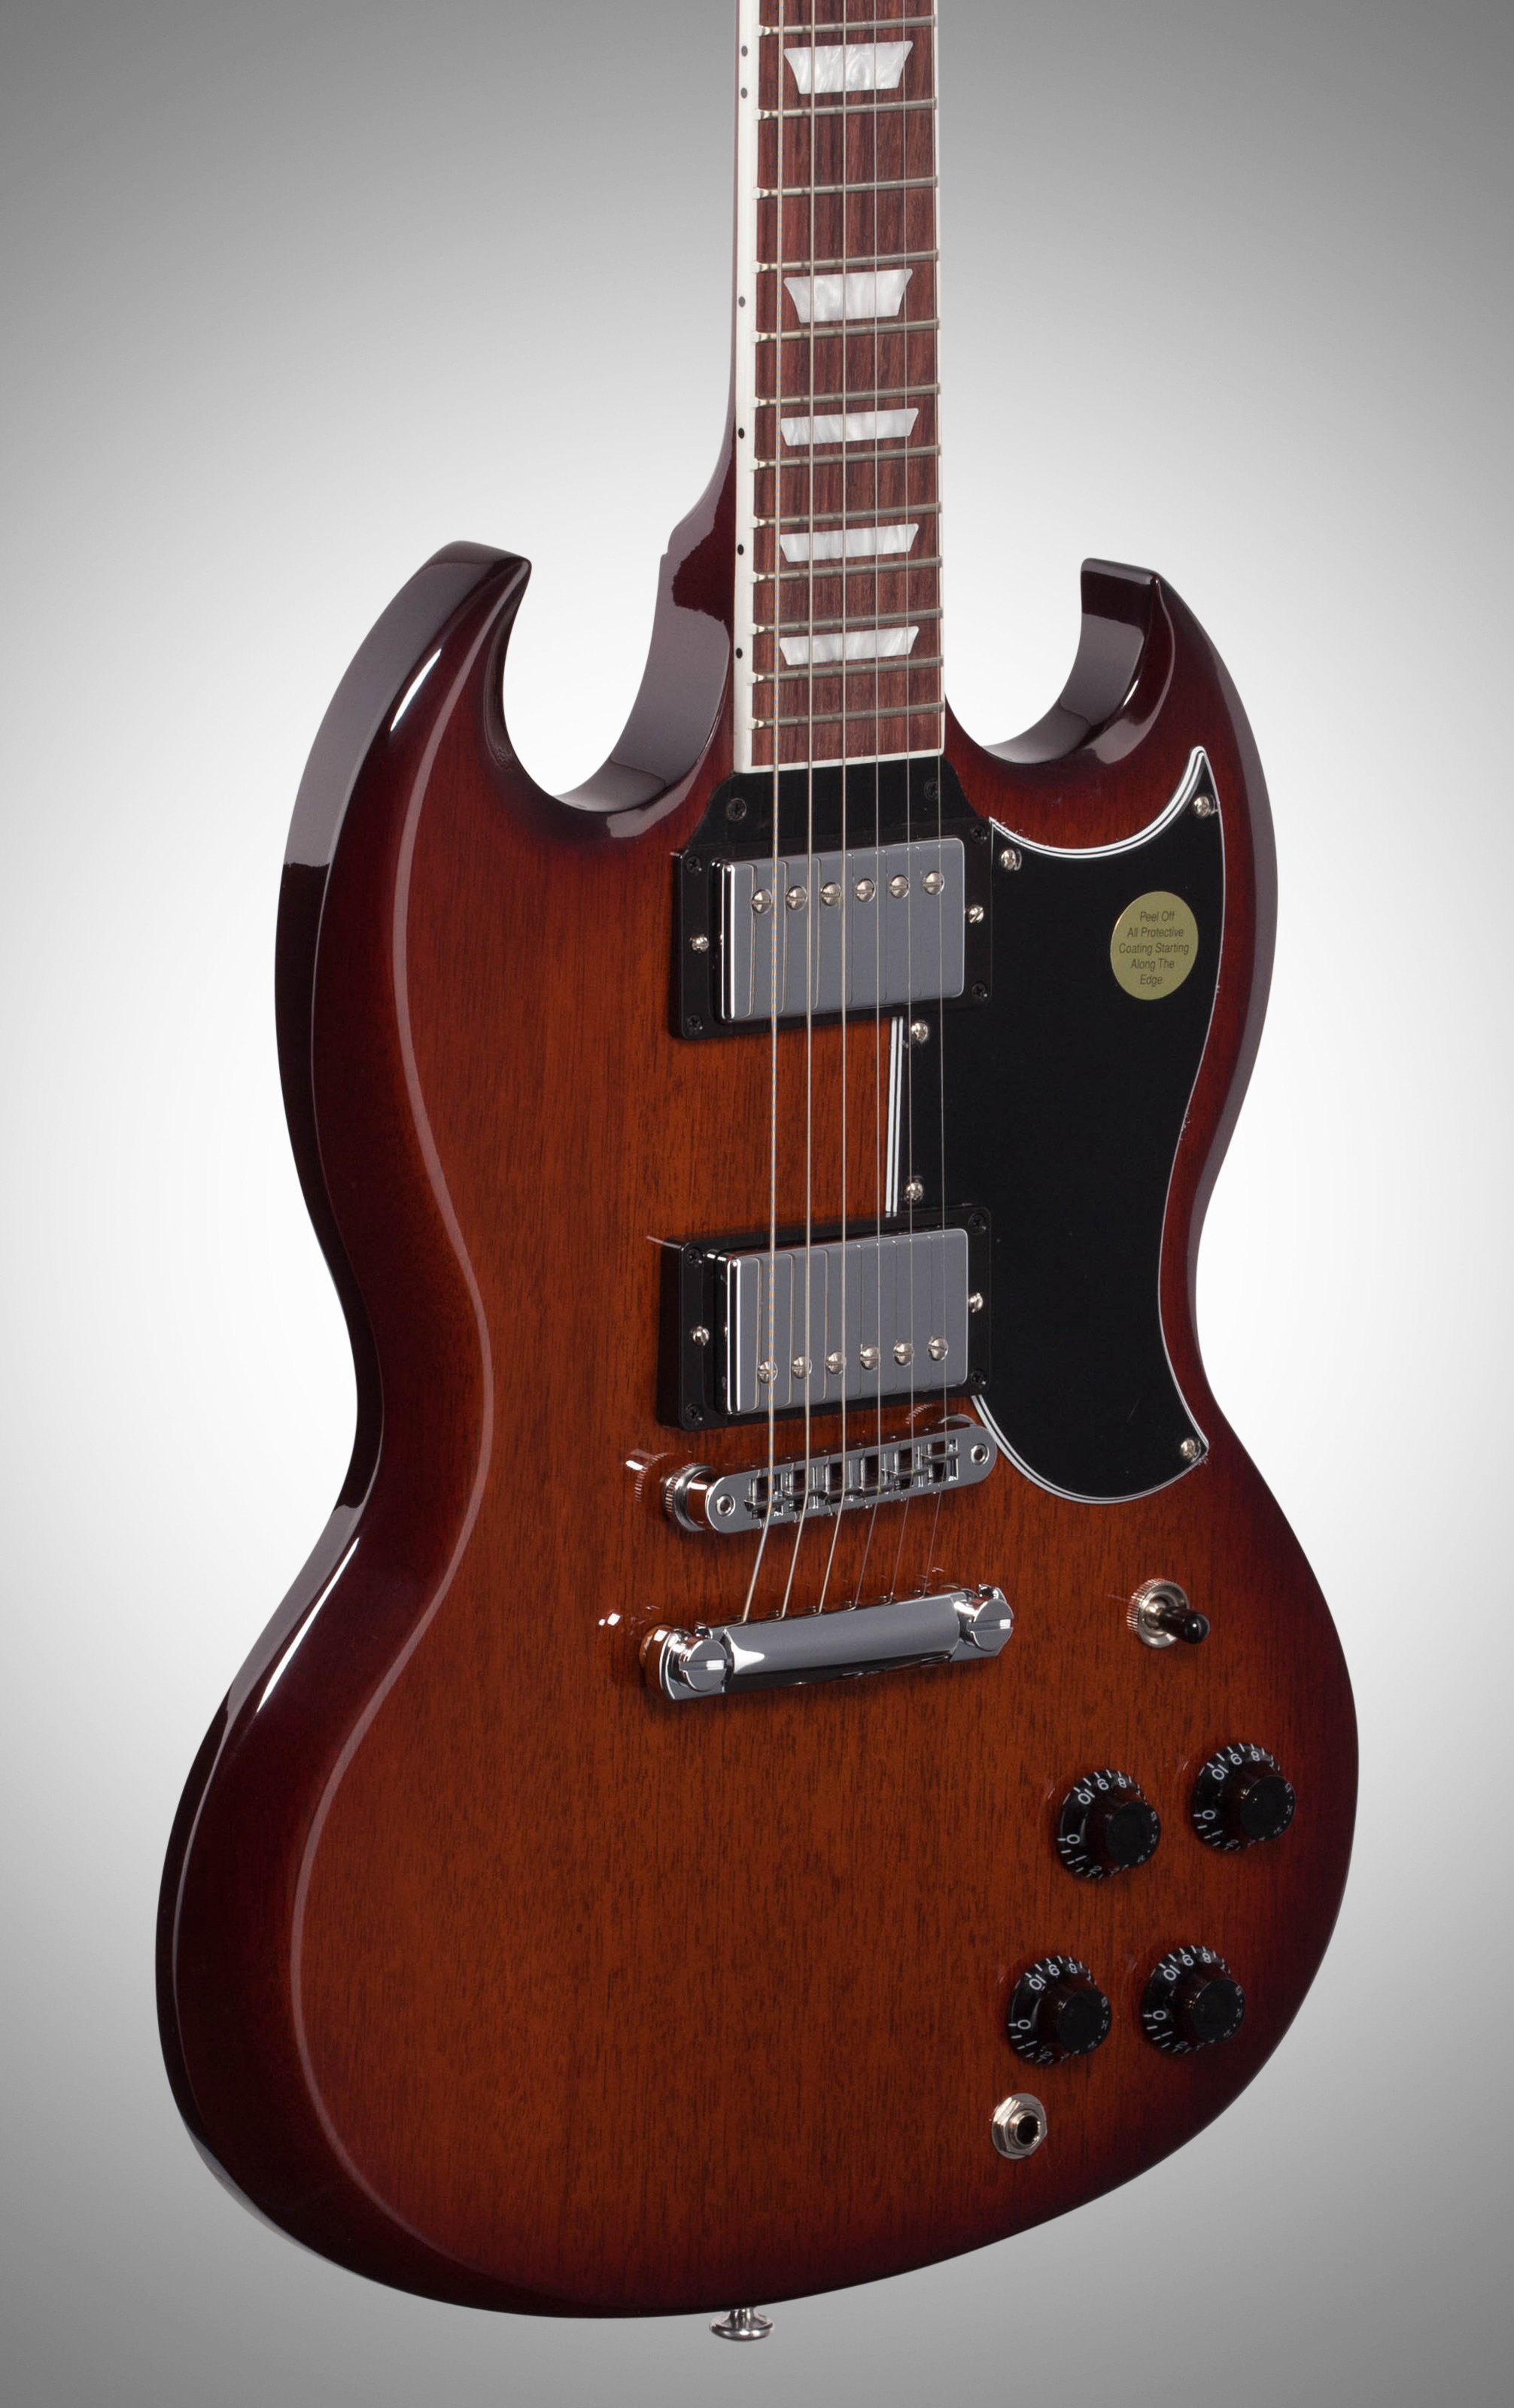 review standard ebony Gibson sg